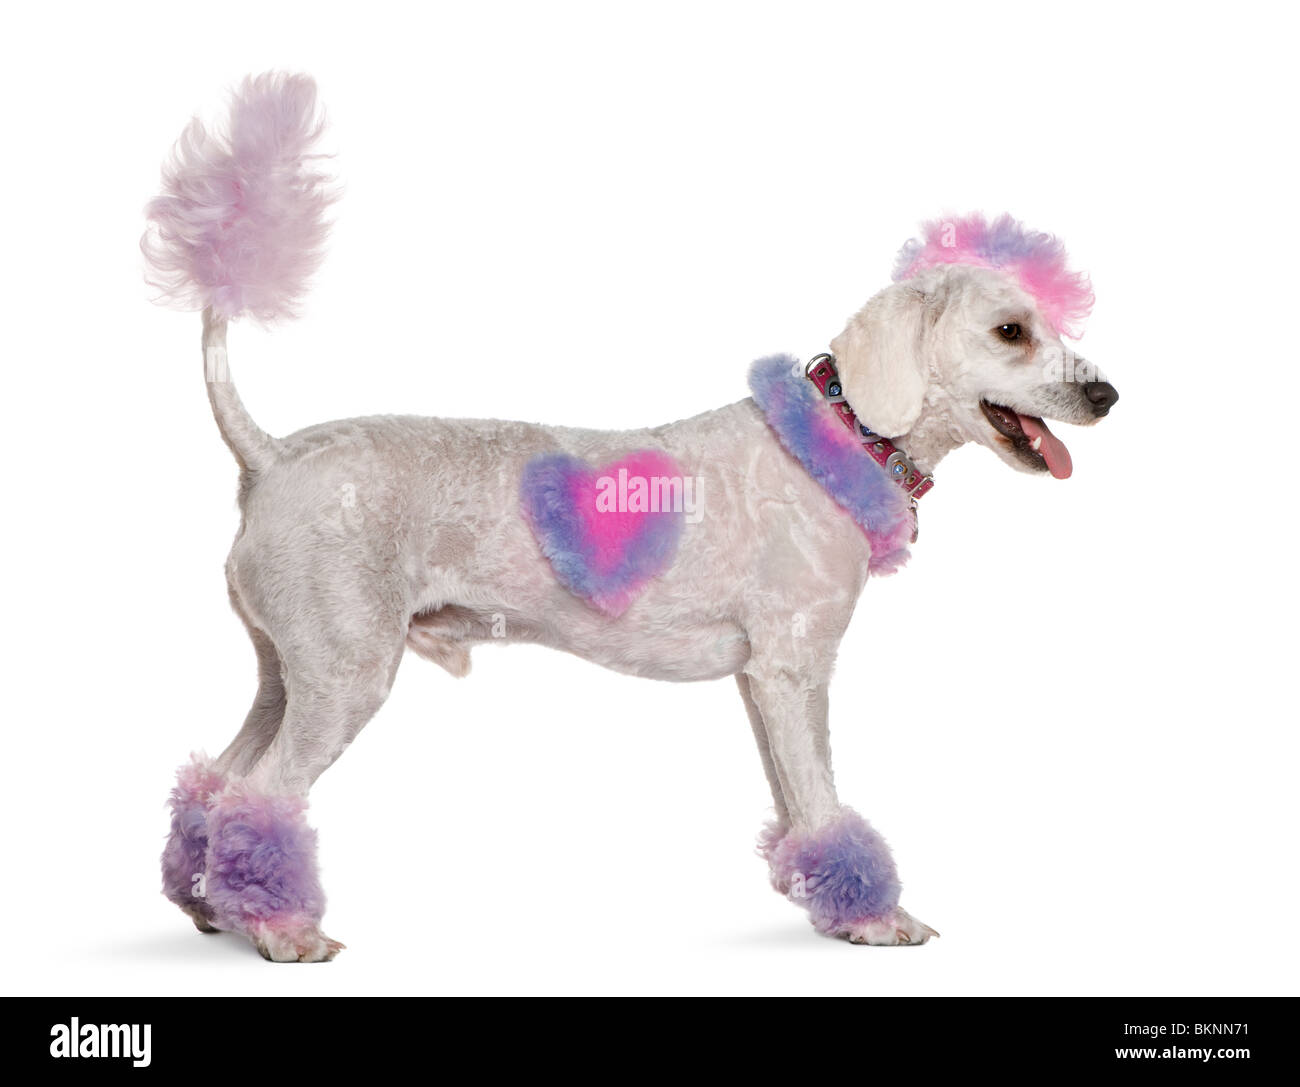 Groomed poodle with pink and purple fur and mohawk, 1 year old, standing in front of white background Stock Photo